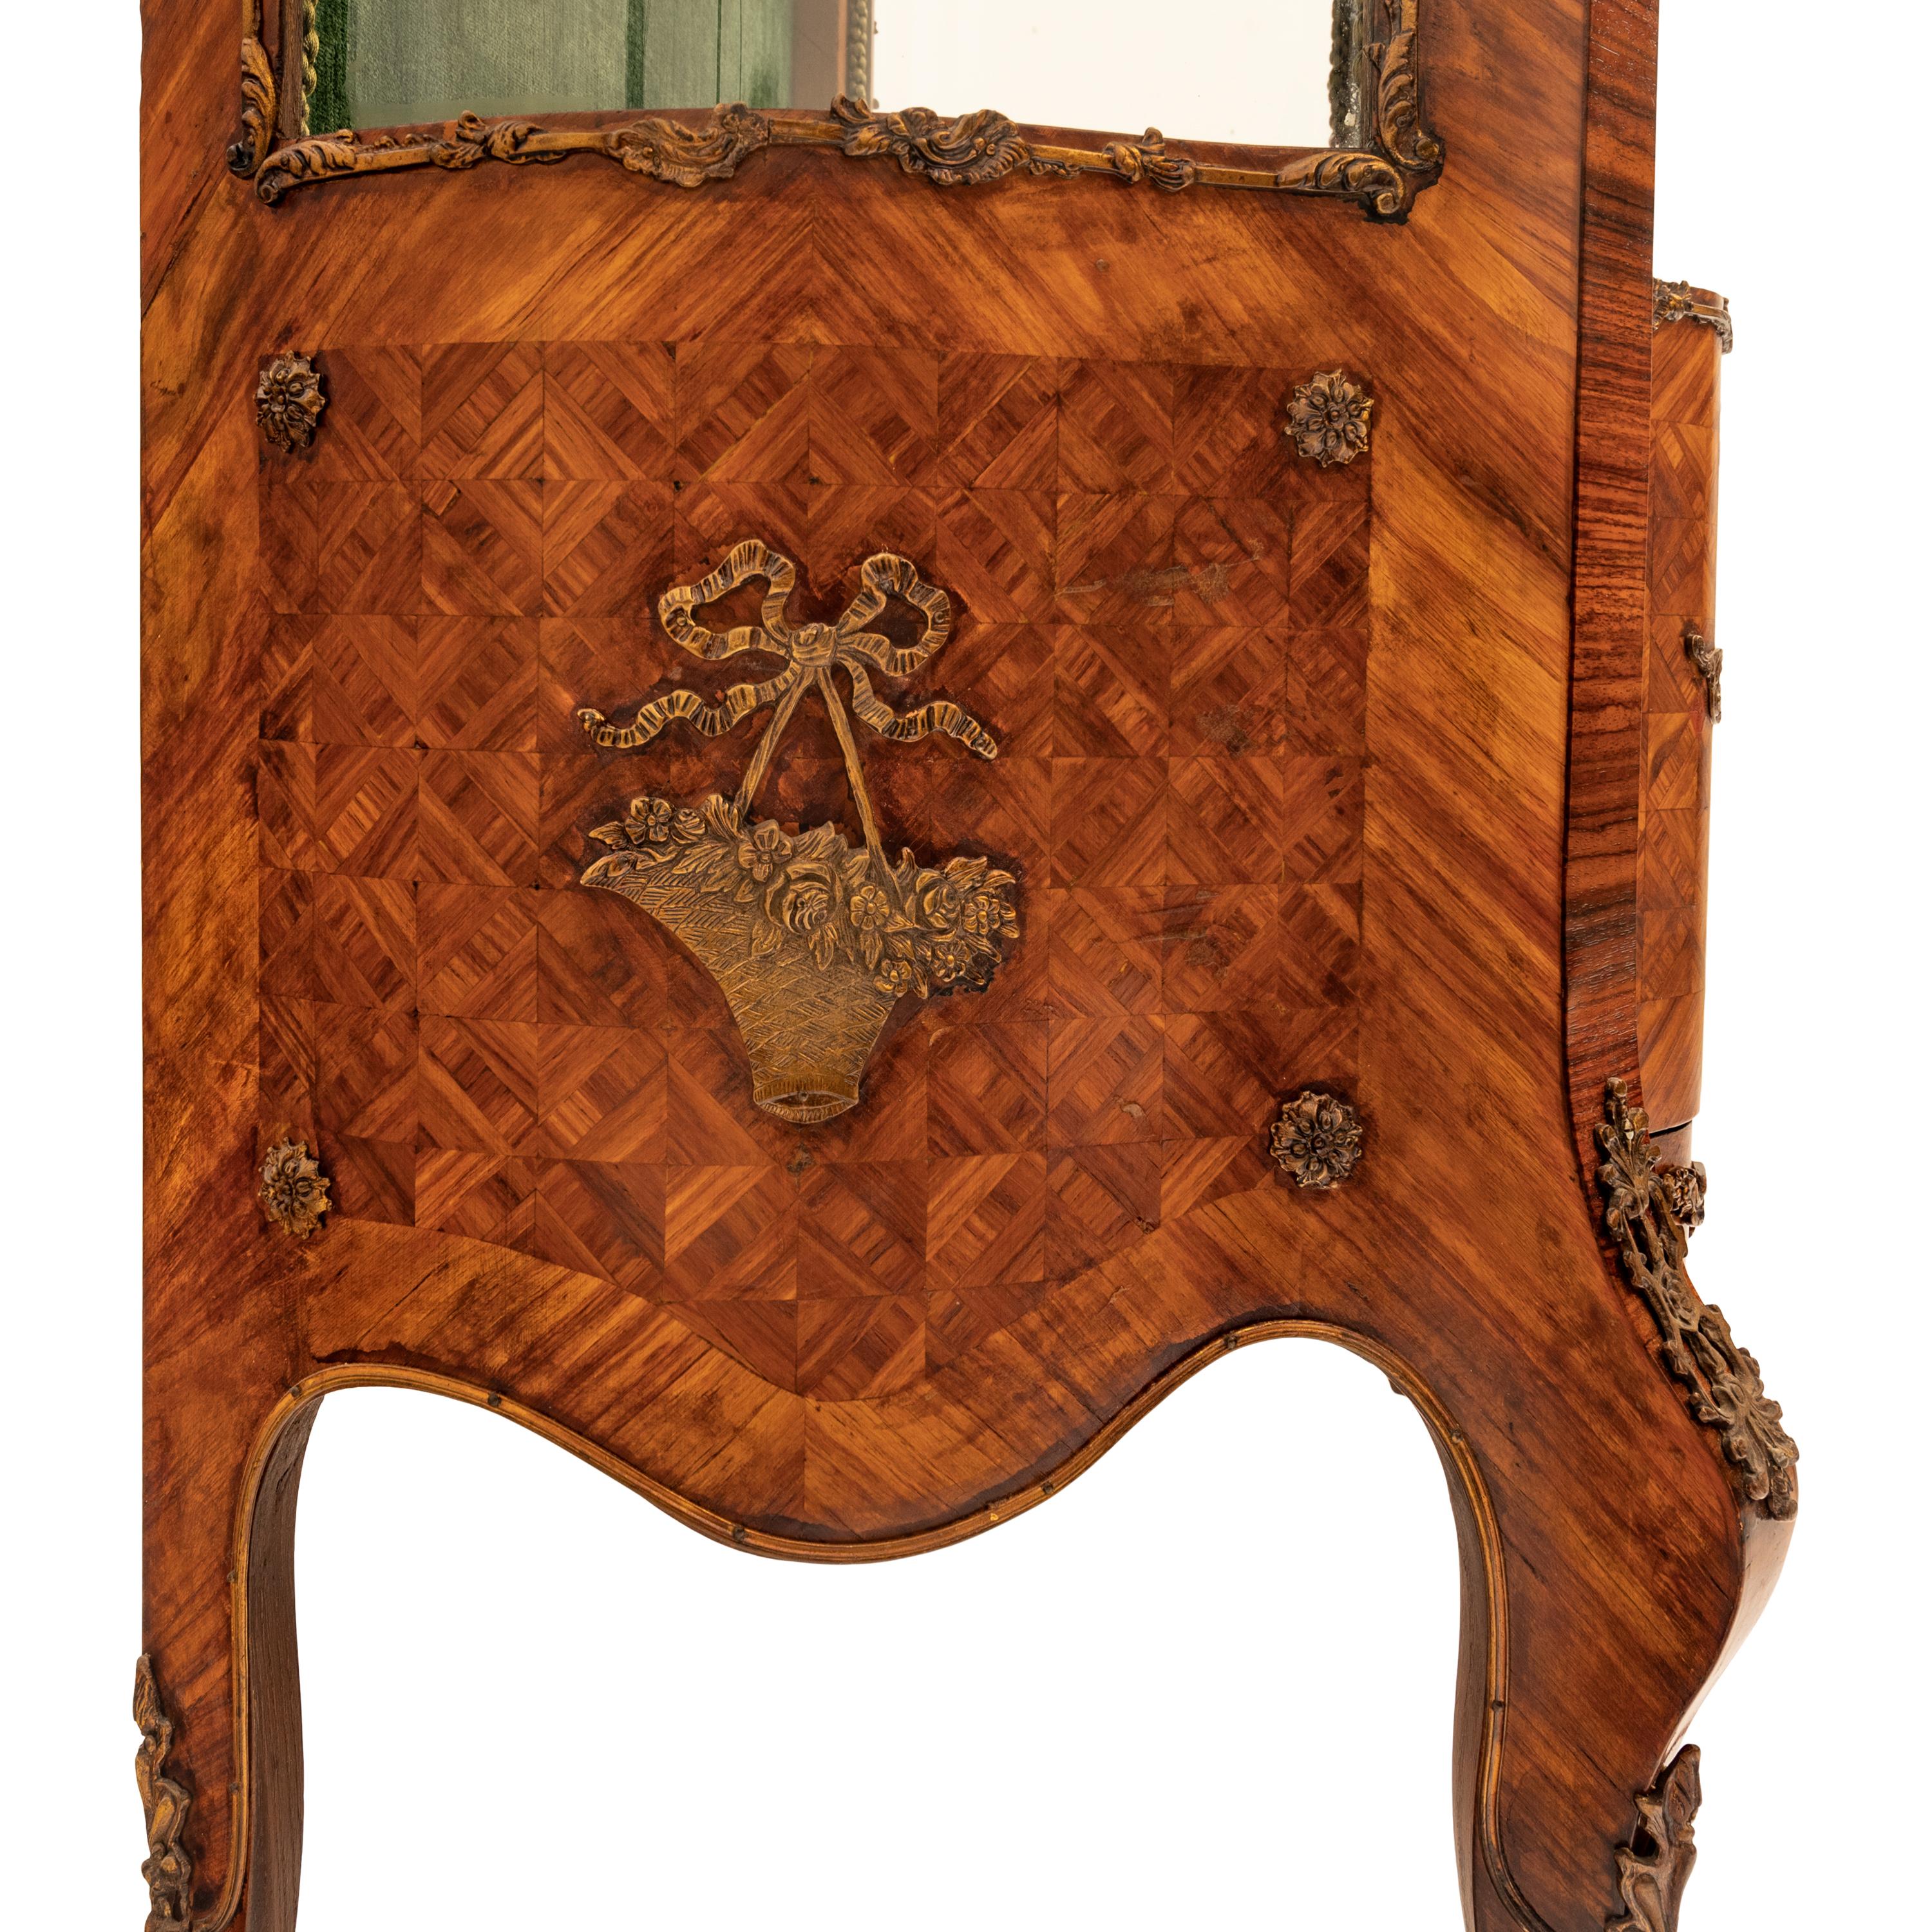 Fine Antique French Louis XV Kingwood Ormolu Bombe Shaped Marquetry Vitrine 1880 For Sale 7